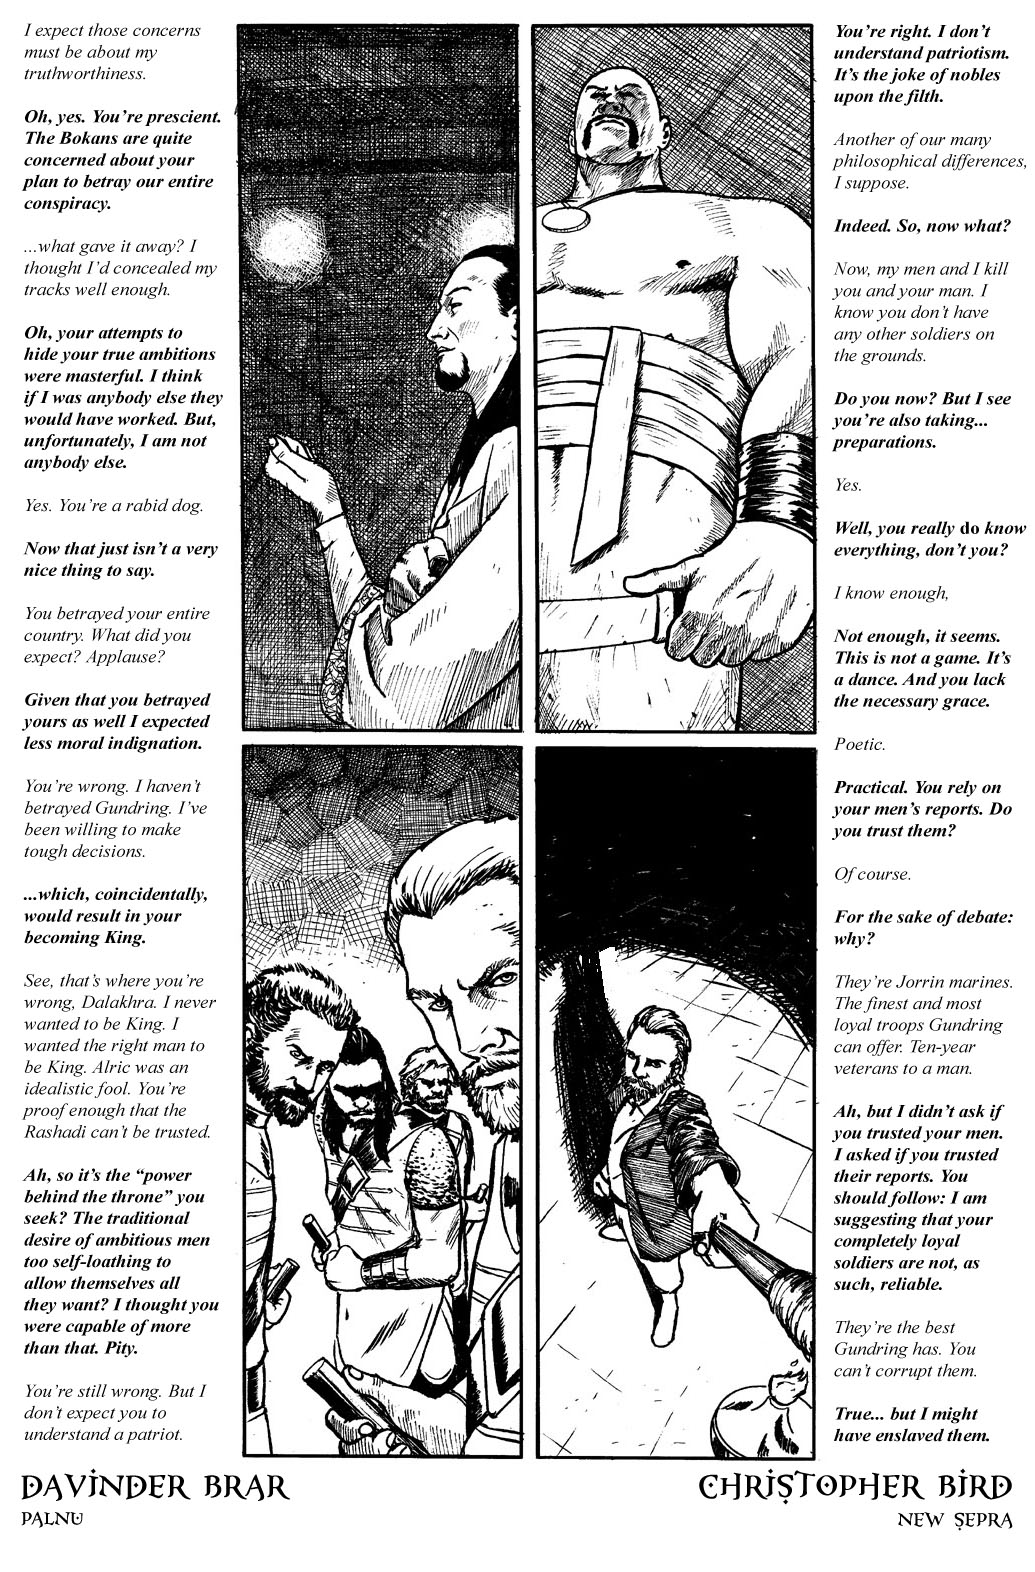 Book 3, page 21